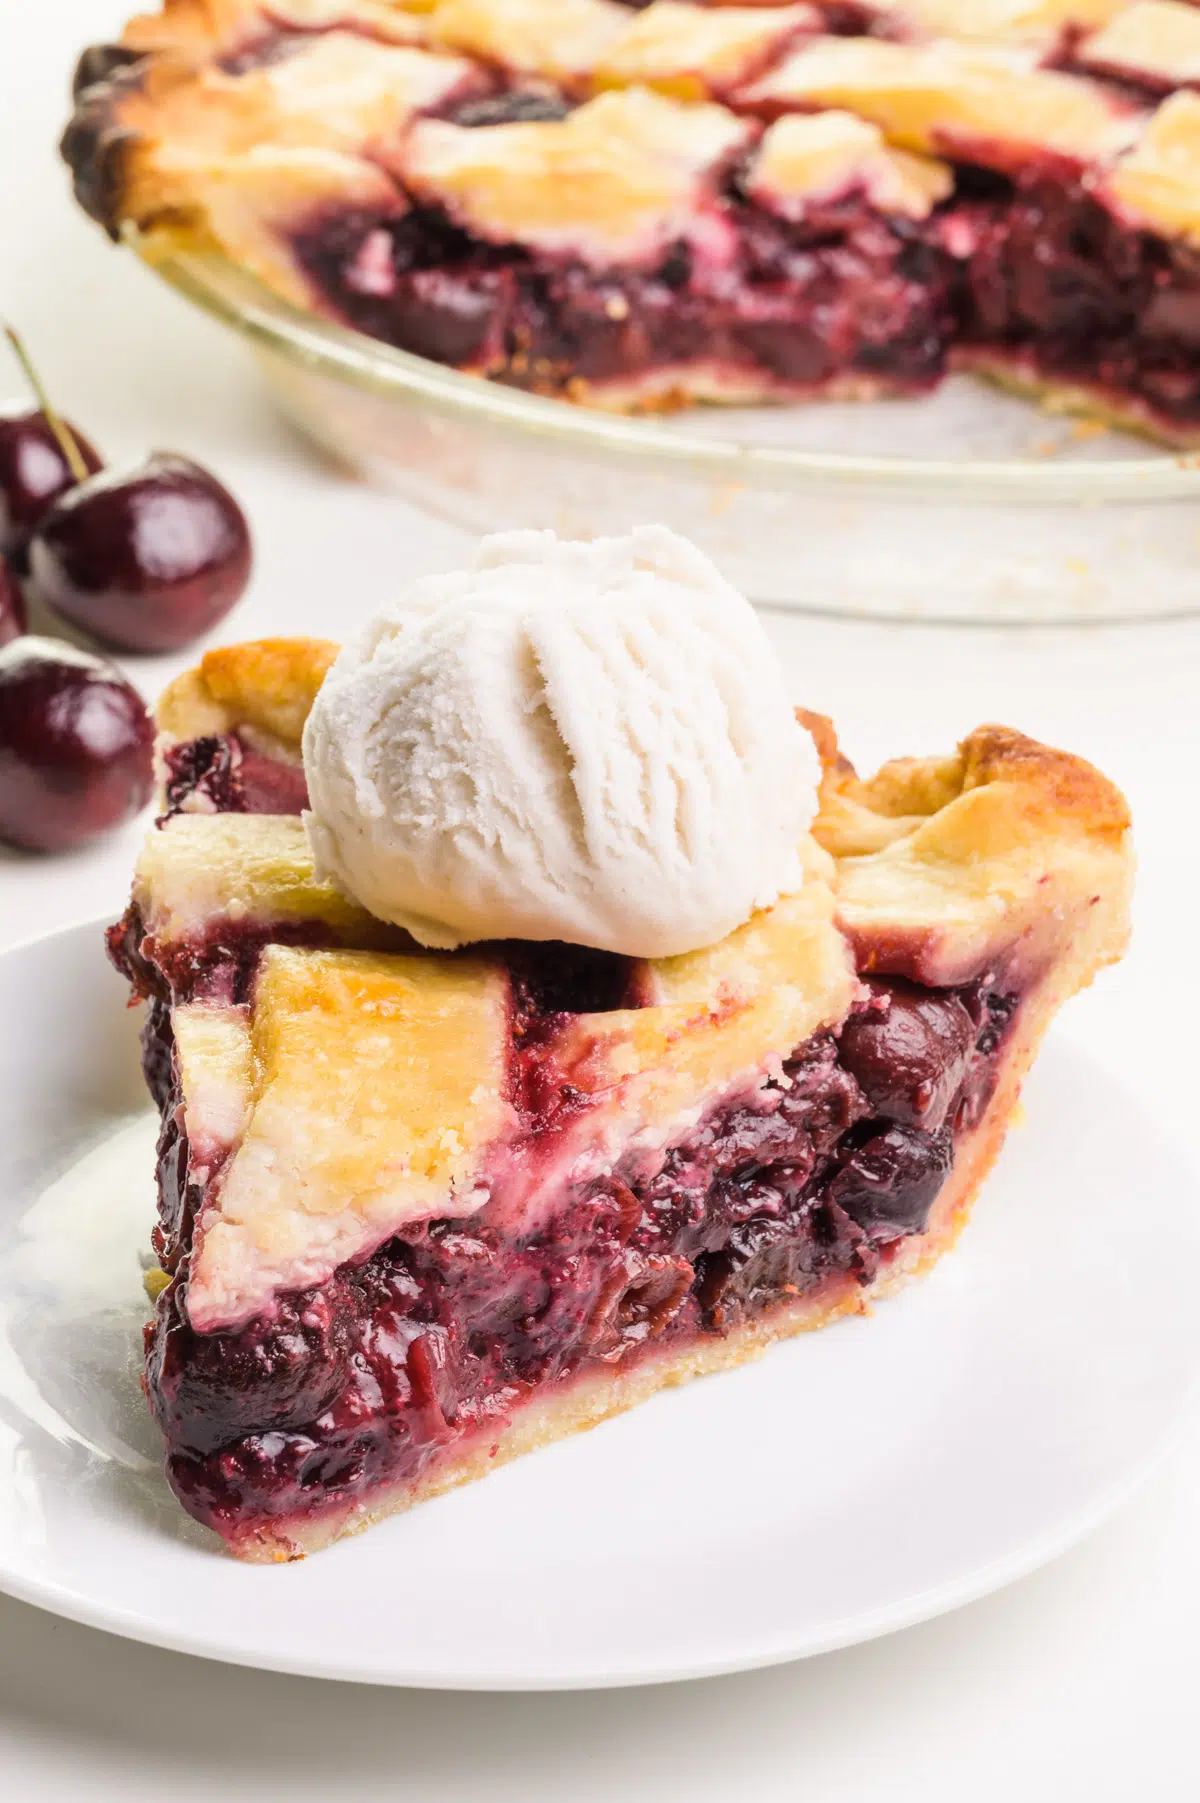 A slice of vegan cherry pie sits on a plate with a scoop of ice cream on top. There is a bowl of cherries and the rest of the pie in the background.